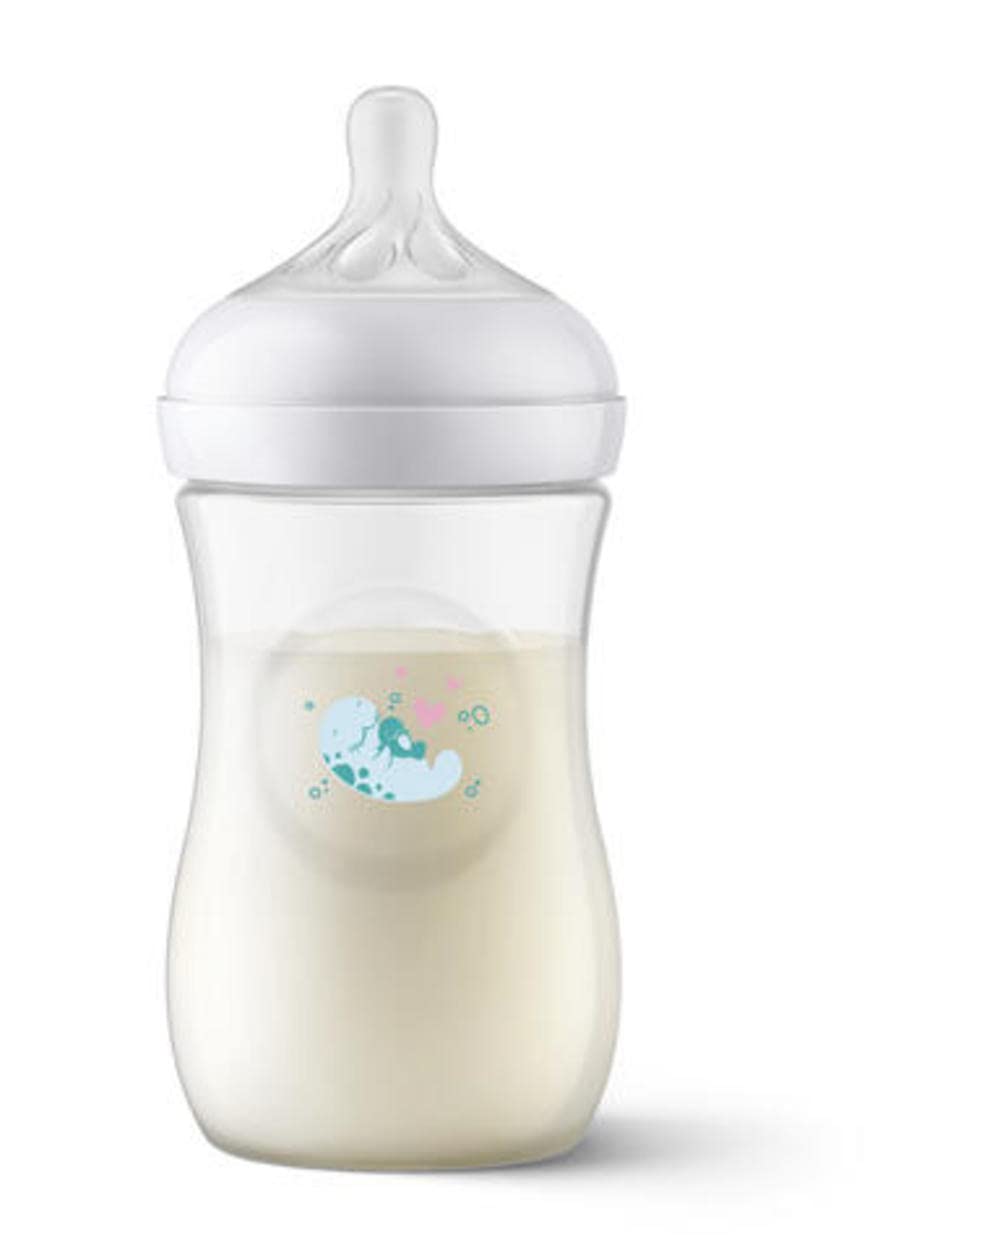 Philips AVENT Natural Baby Bottle with Natural Response Nipple, Gift Set Sea Design, SCD838/05